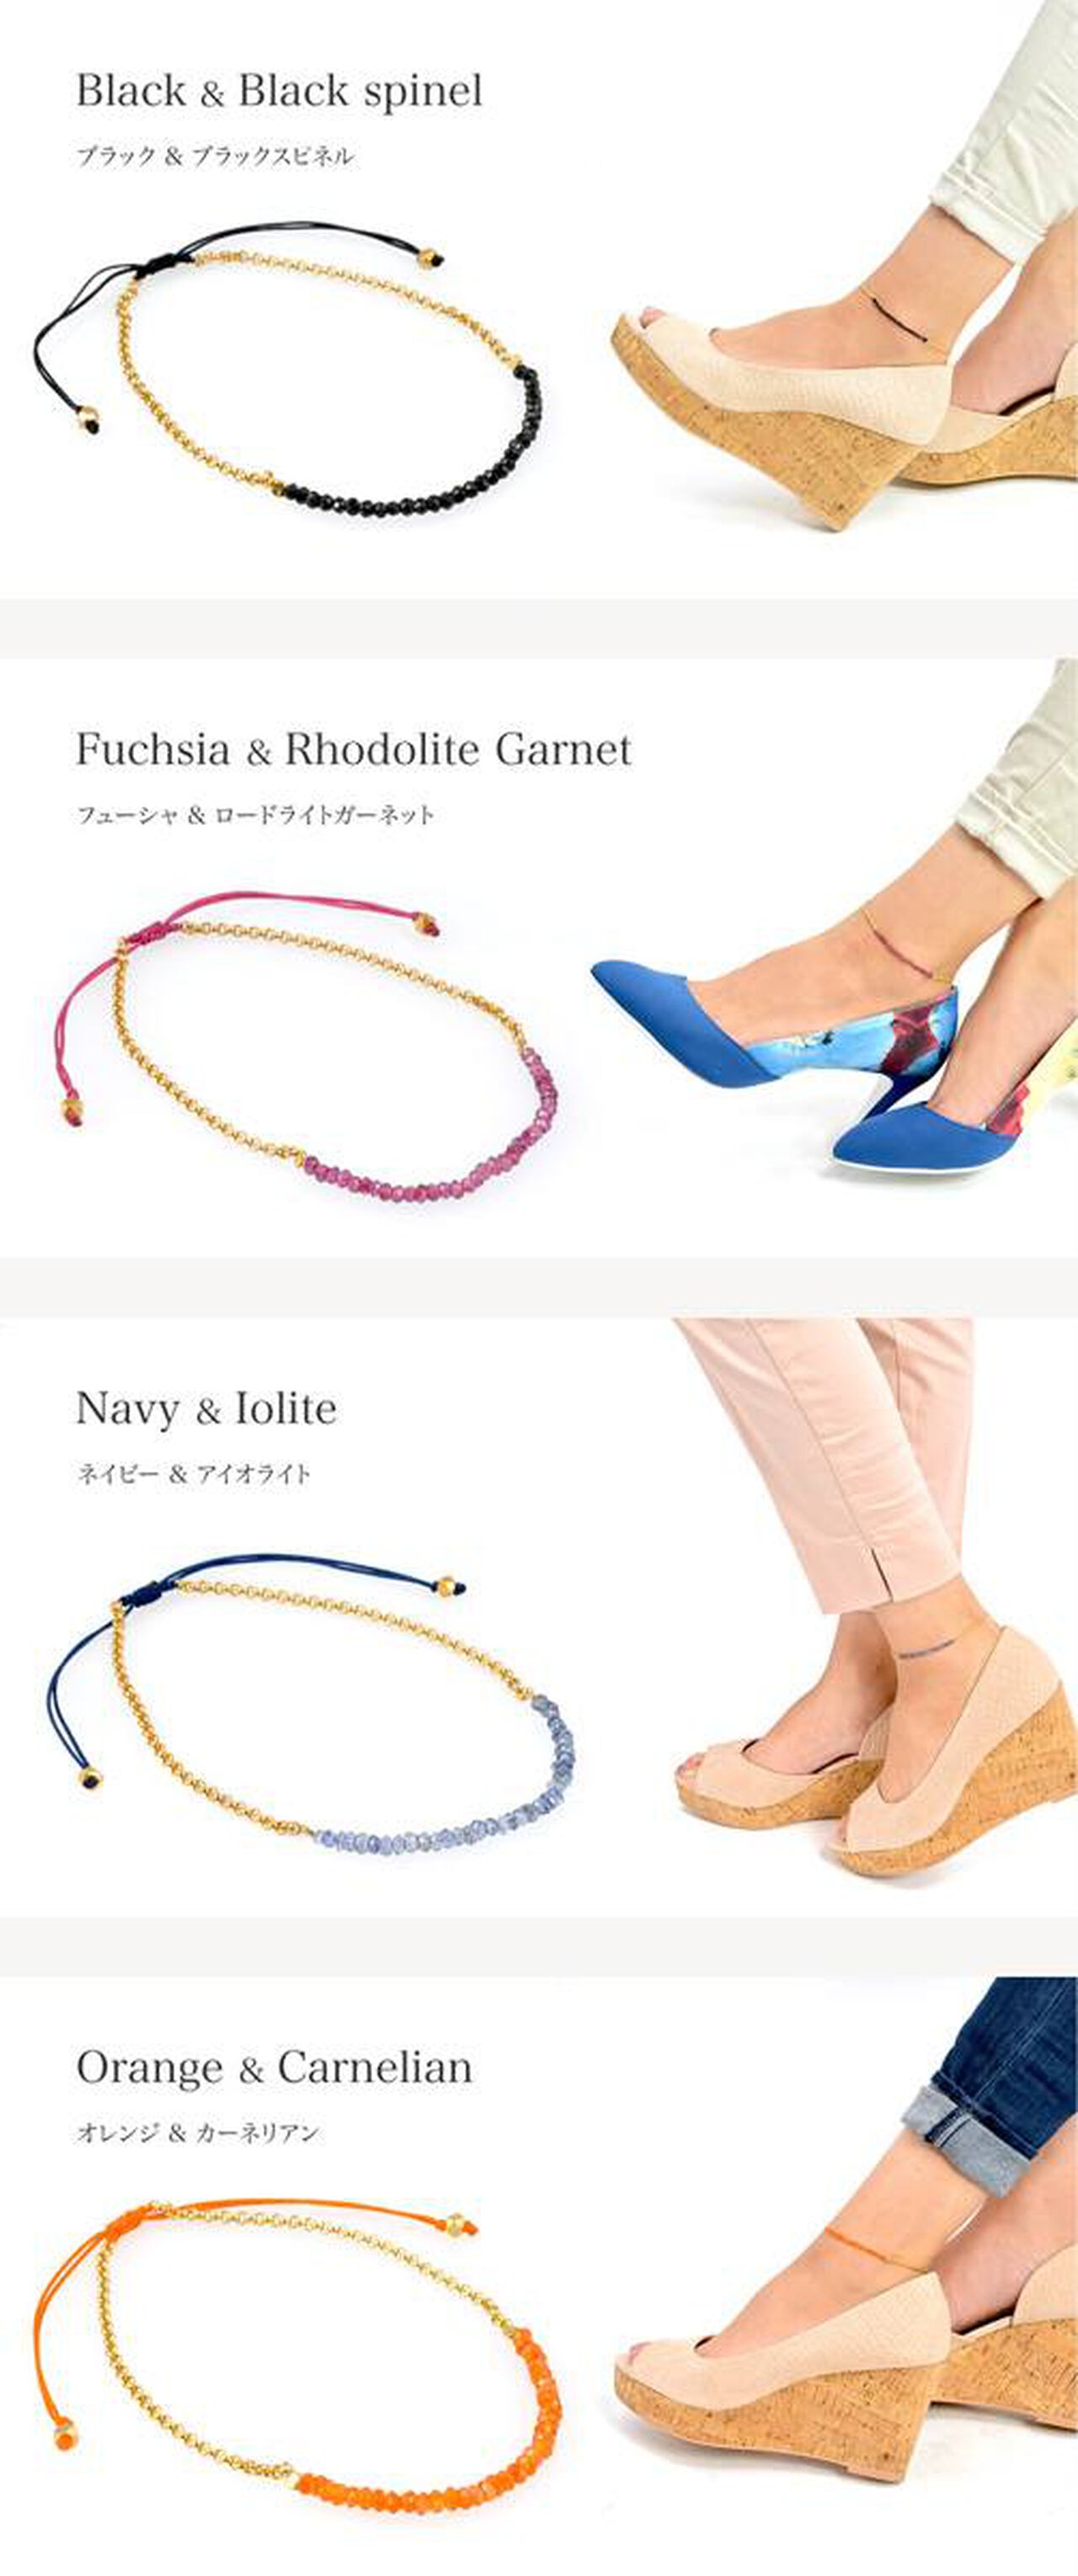 Chain Stone Beads Notched Cord Anklet,Navy, large image number 7